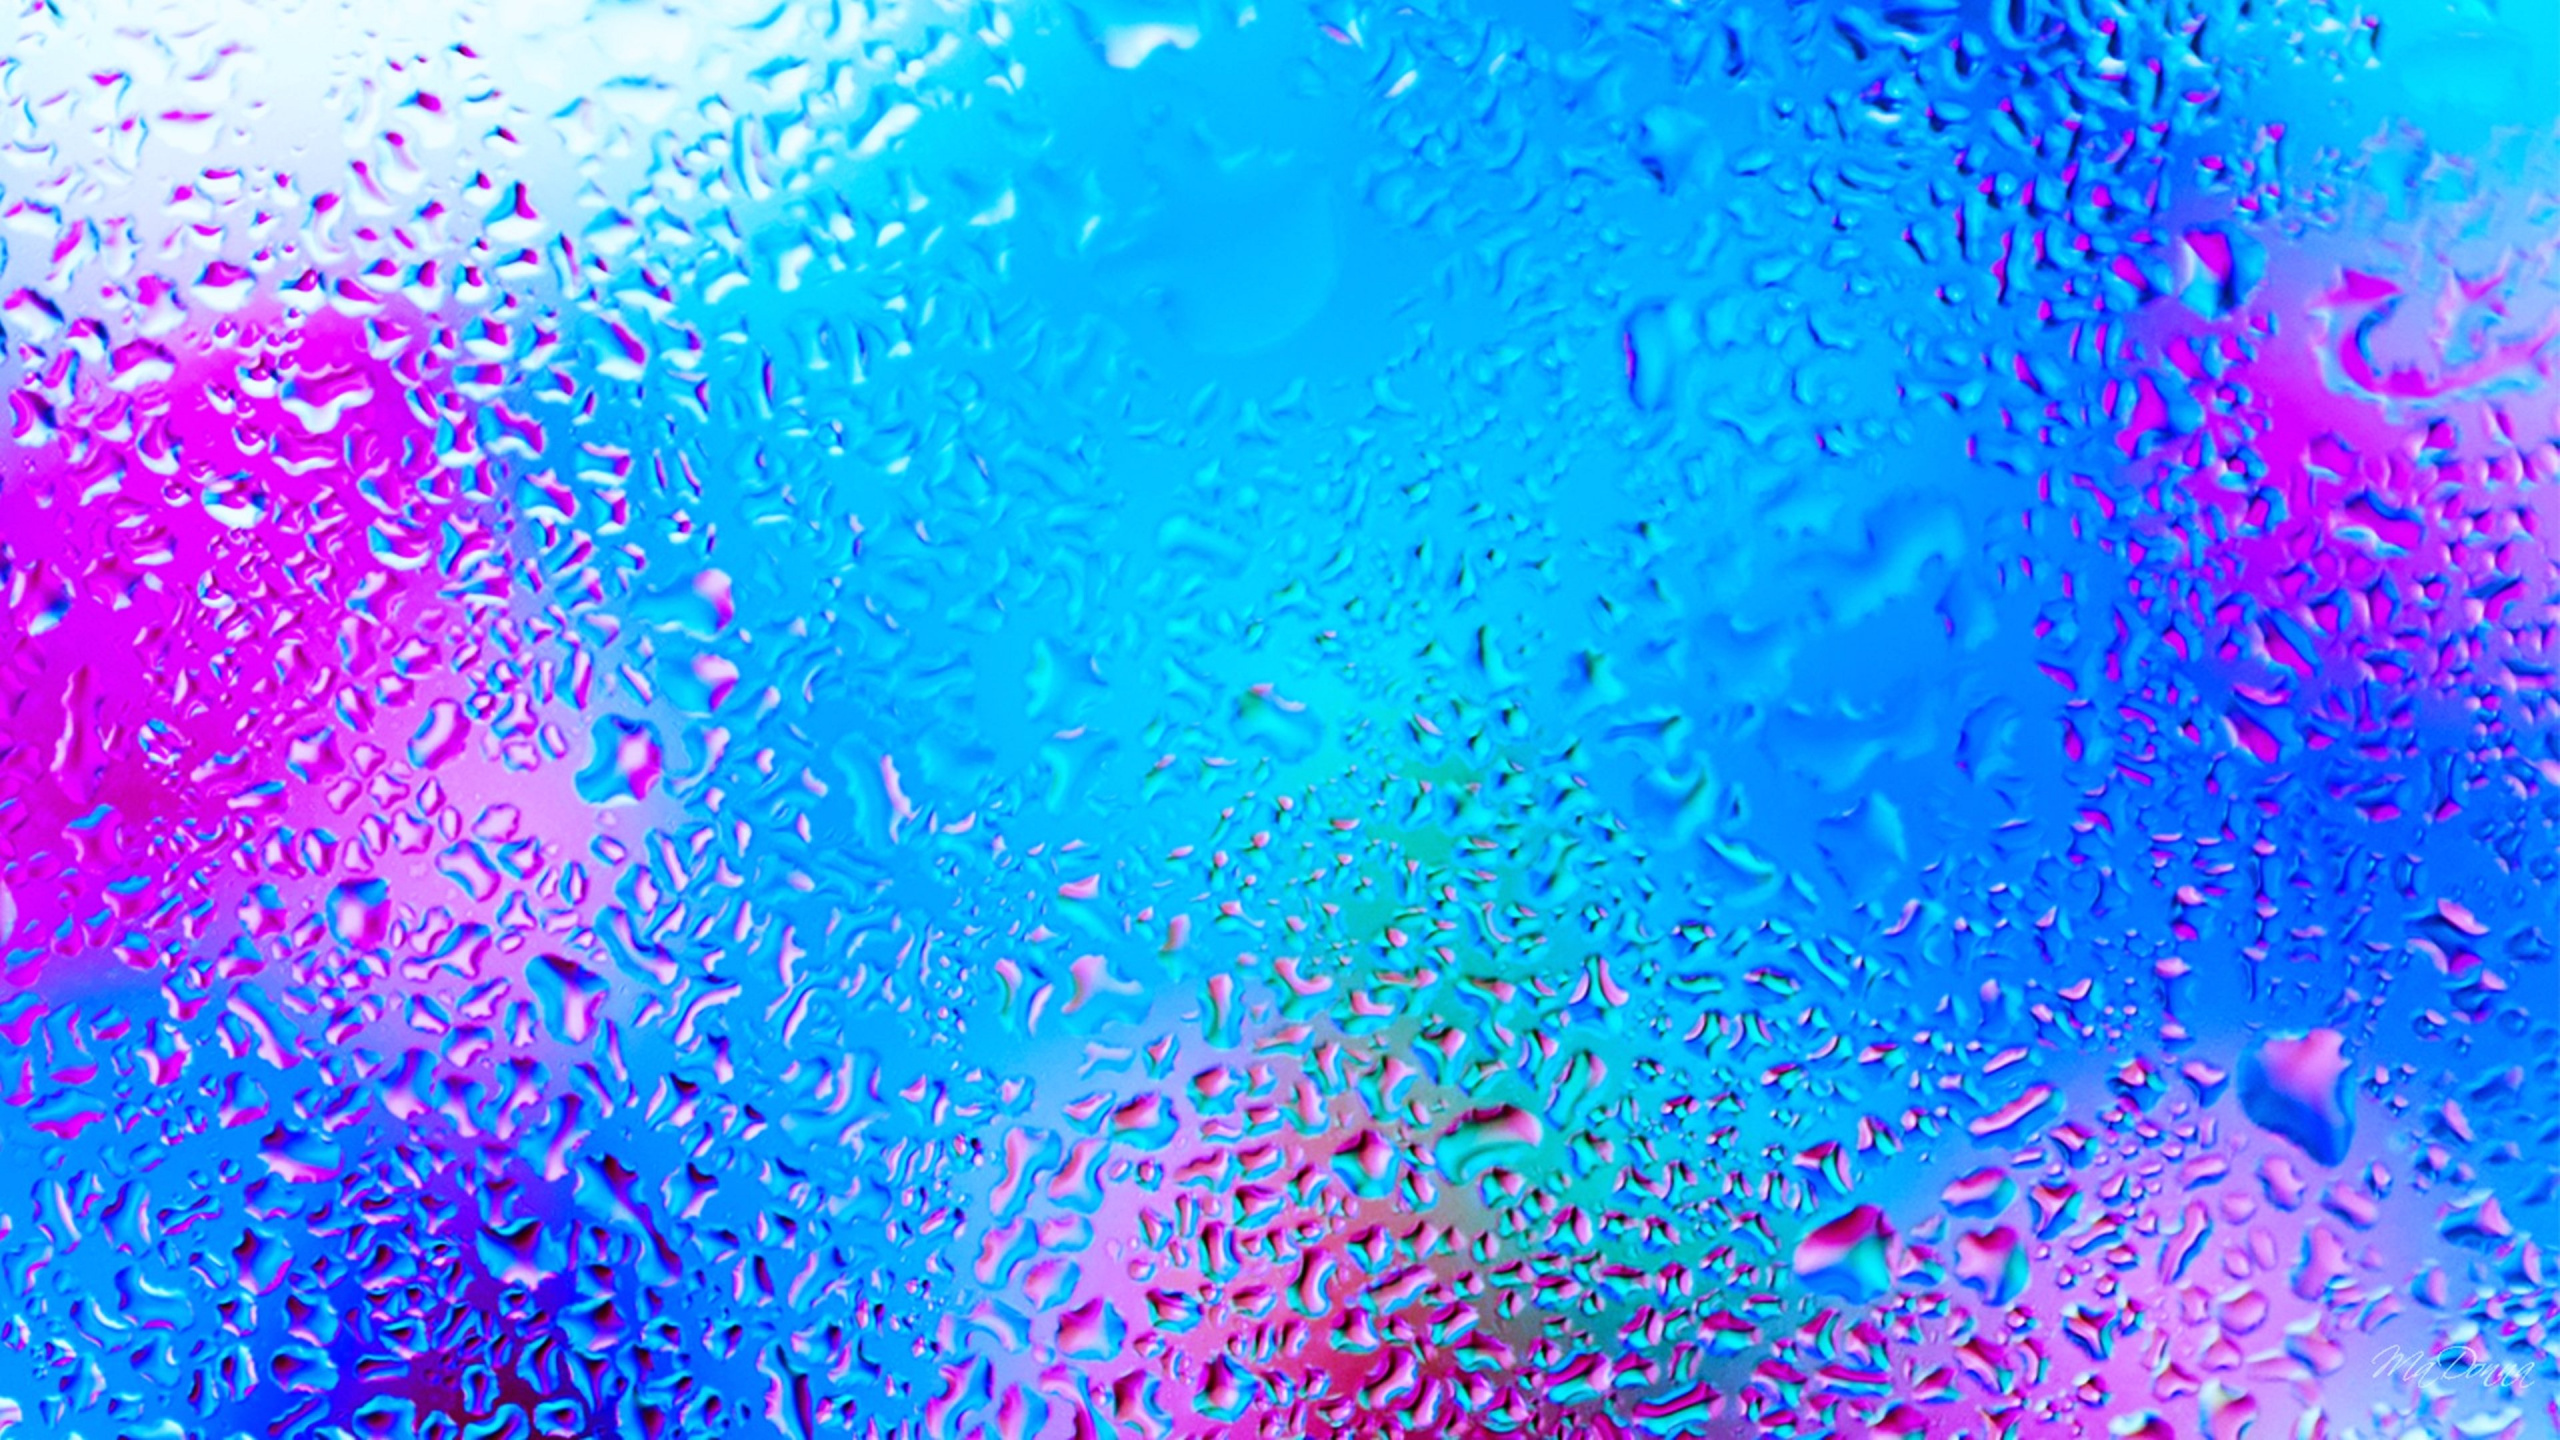 Water Droplets on Glass During Daytime. Wallpaper in 2560x1440 Resolution